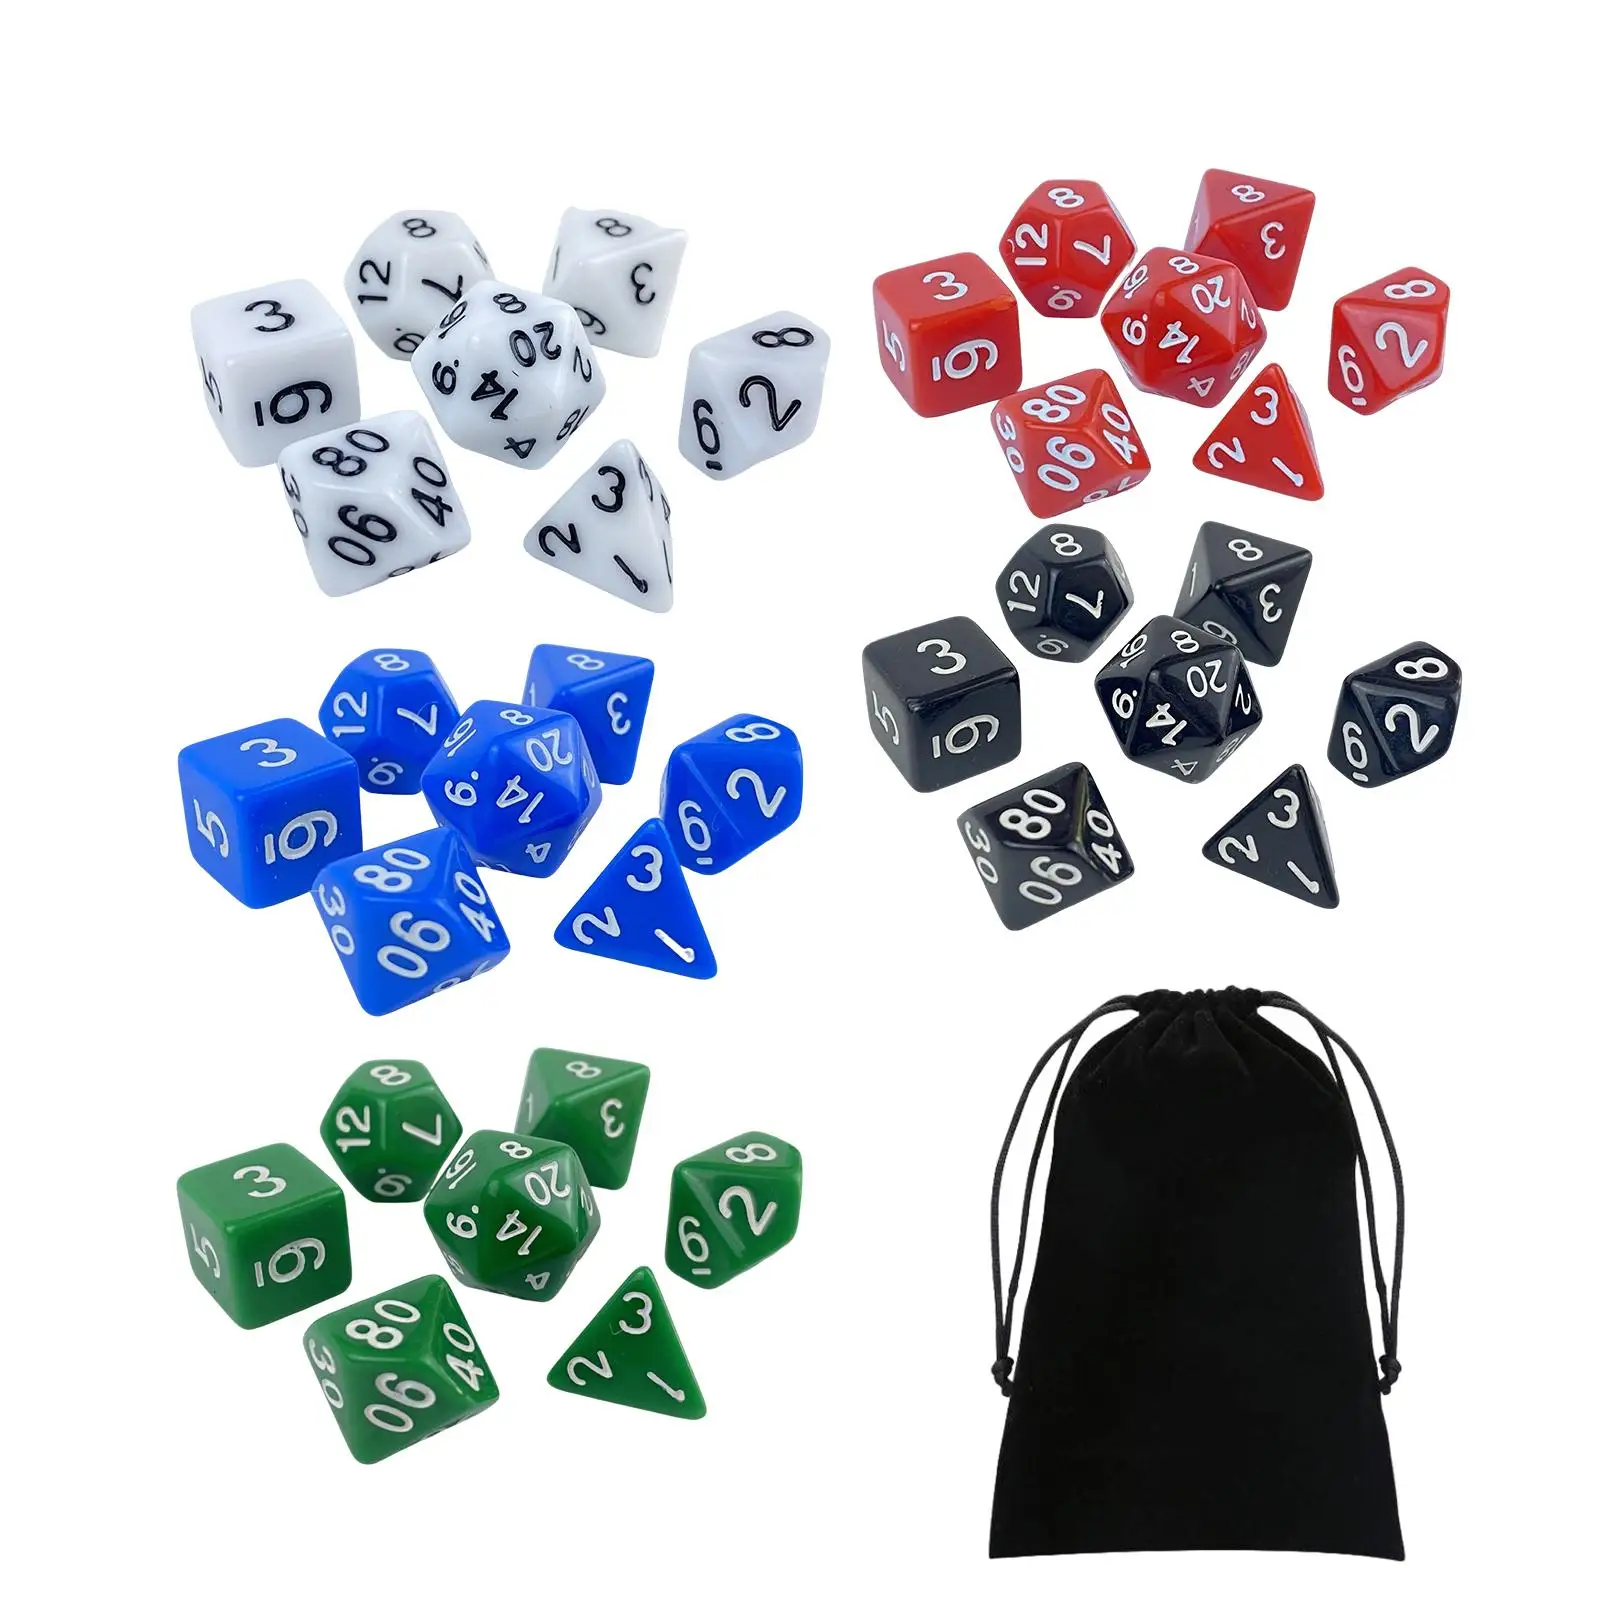 35x Engraved Polyhedral Dices Set Entertainment Toy for KTV Table Games